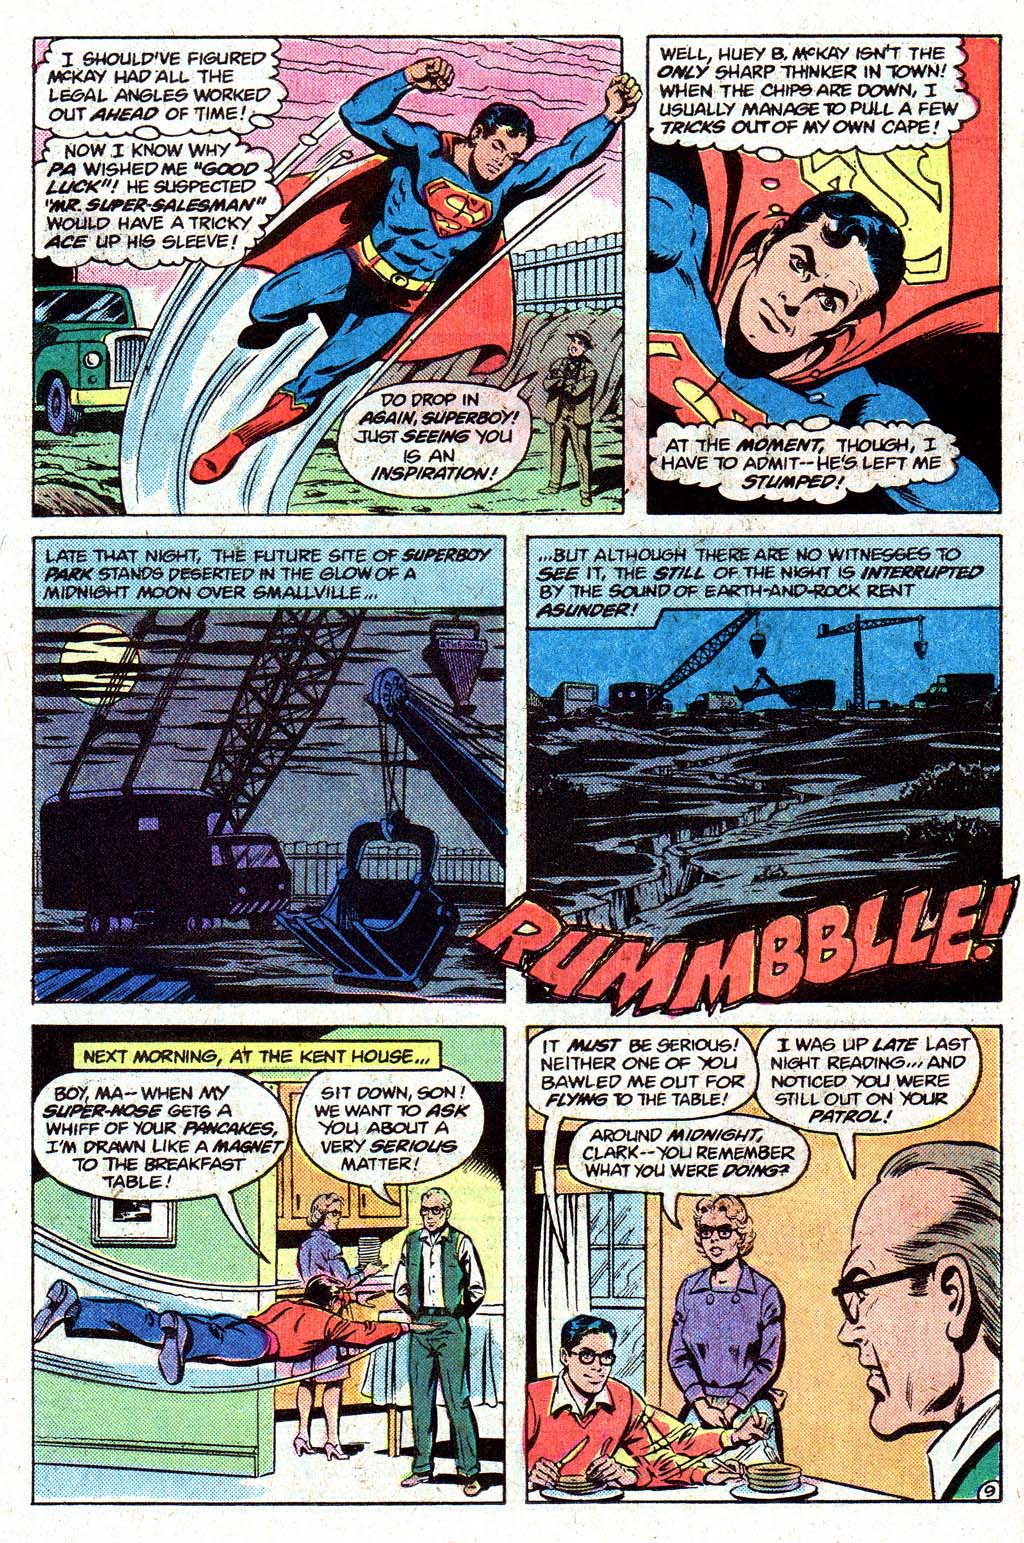 The New Adventures of Superboy 29 Page 13